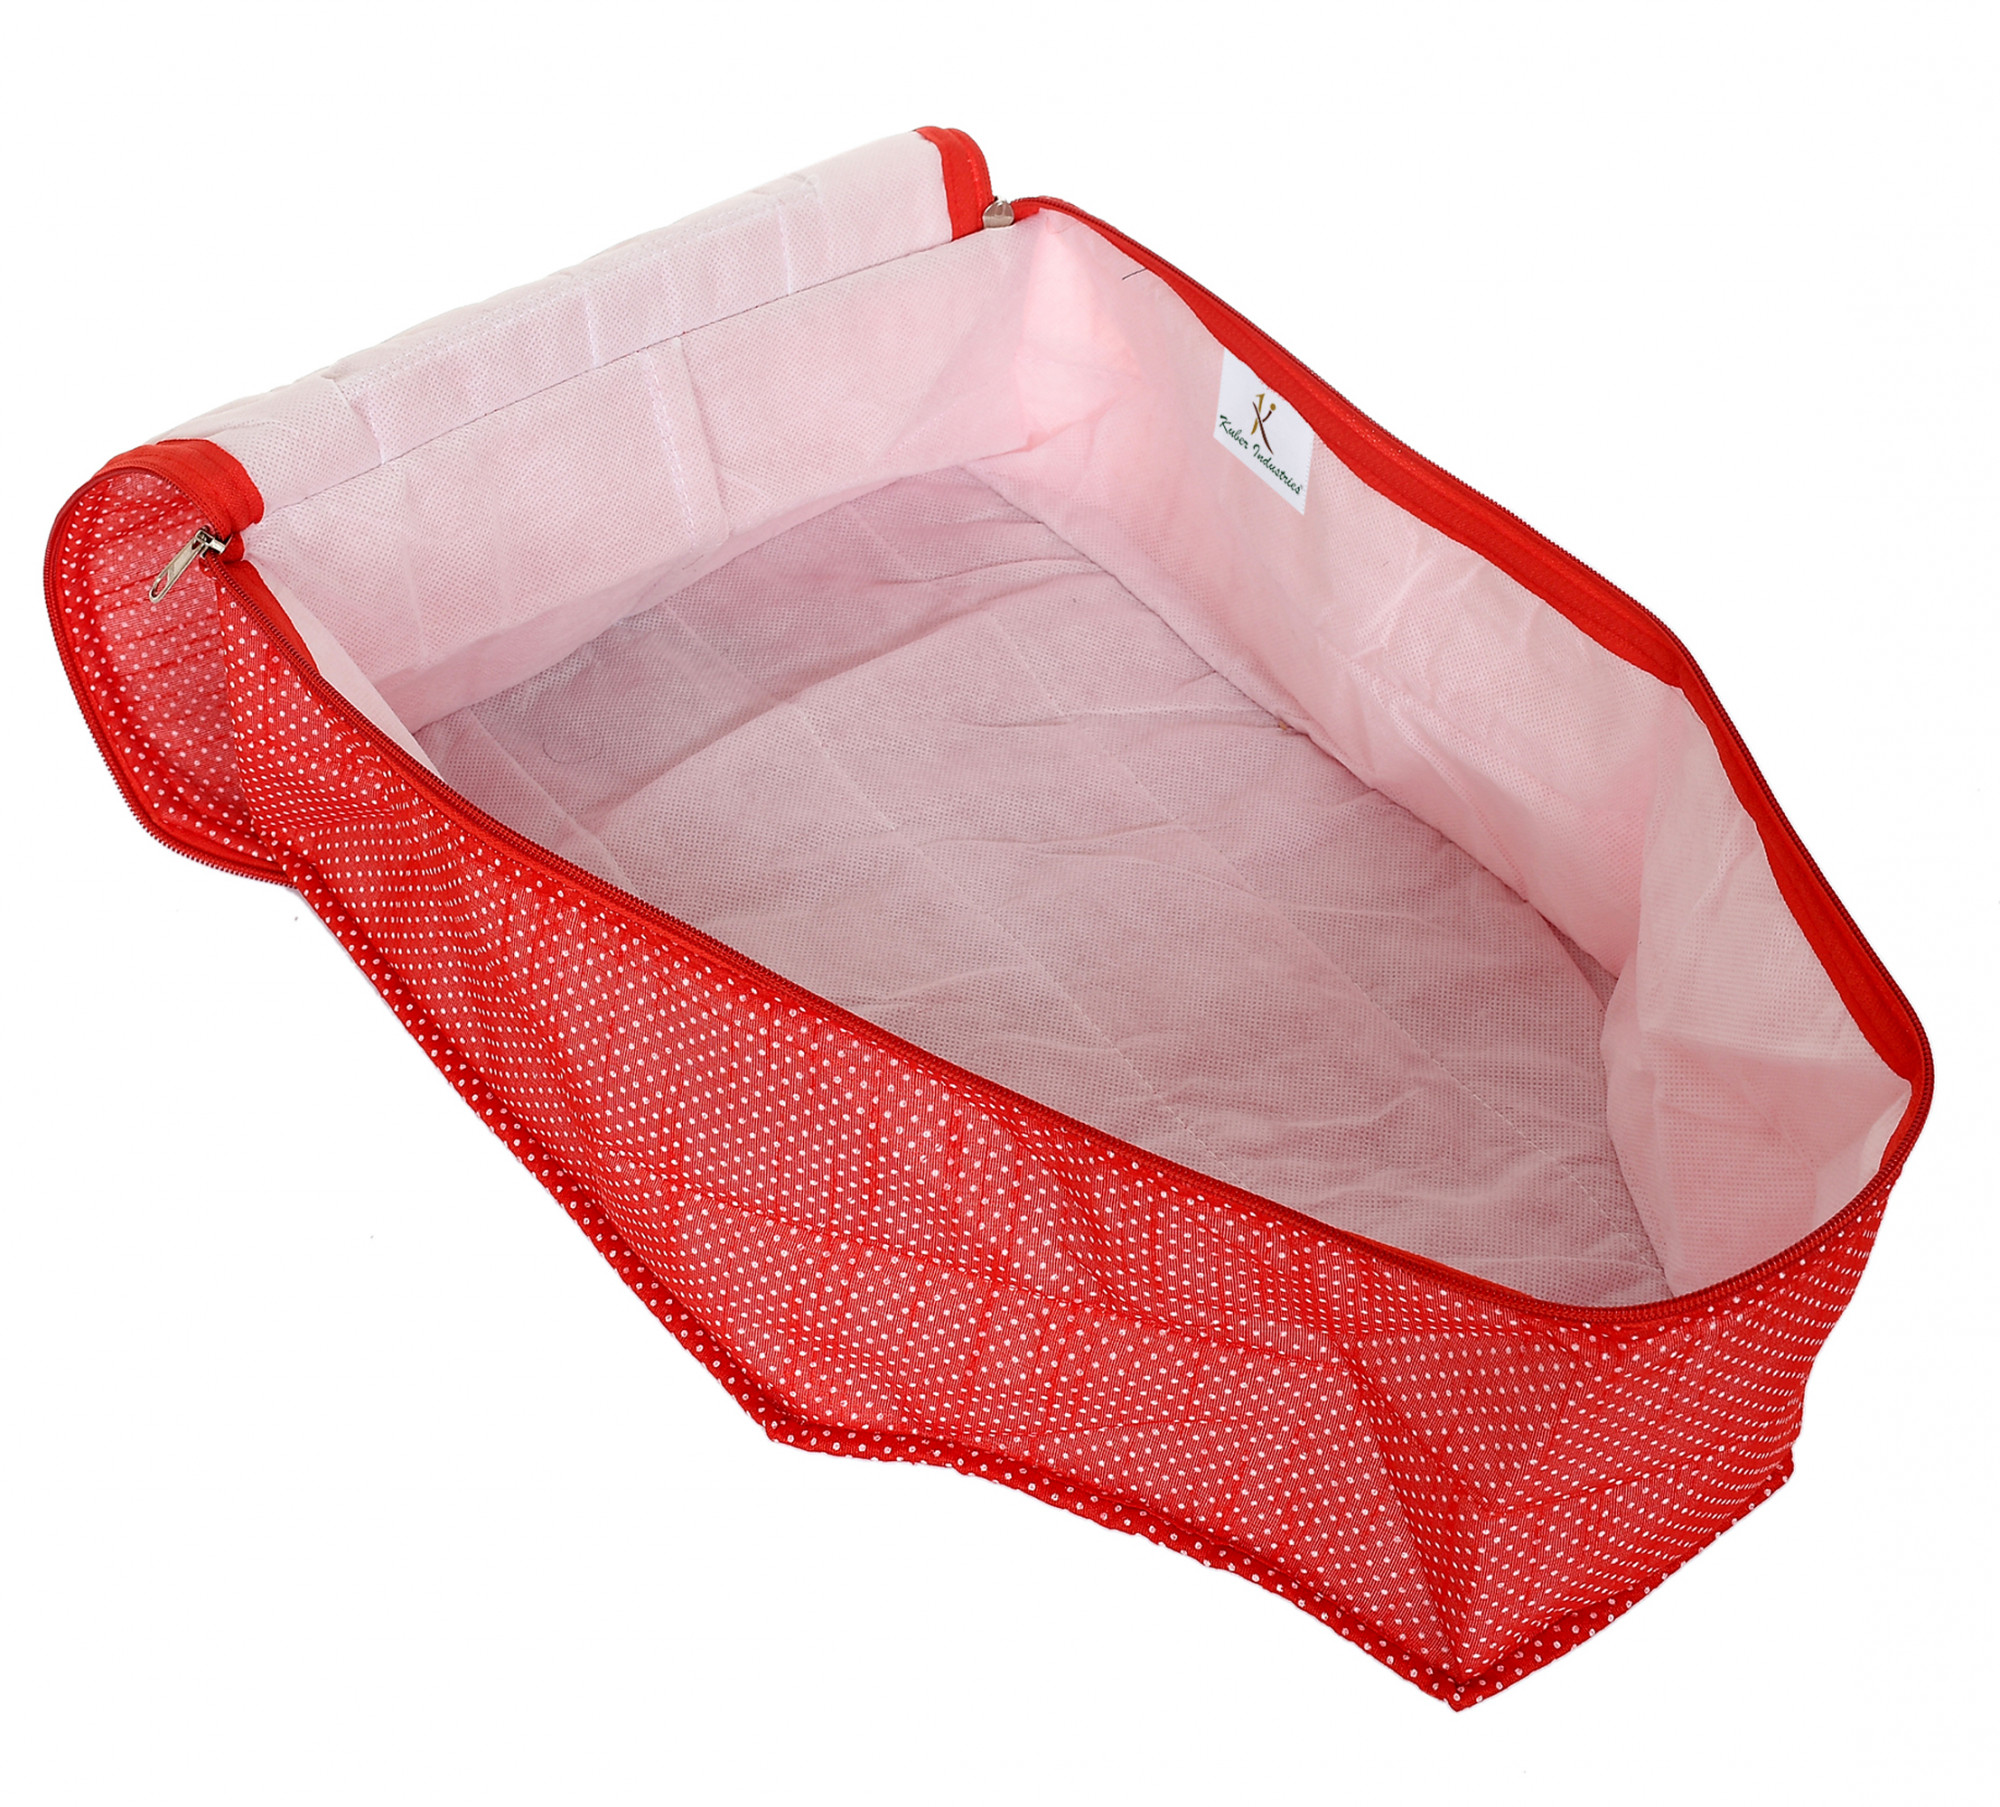 Kuber Industries Dot Printed Non Woven Blouse Cover Storage Bag, Organizers for Wardrobe (Red)